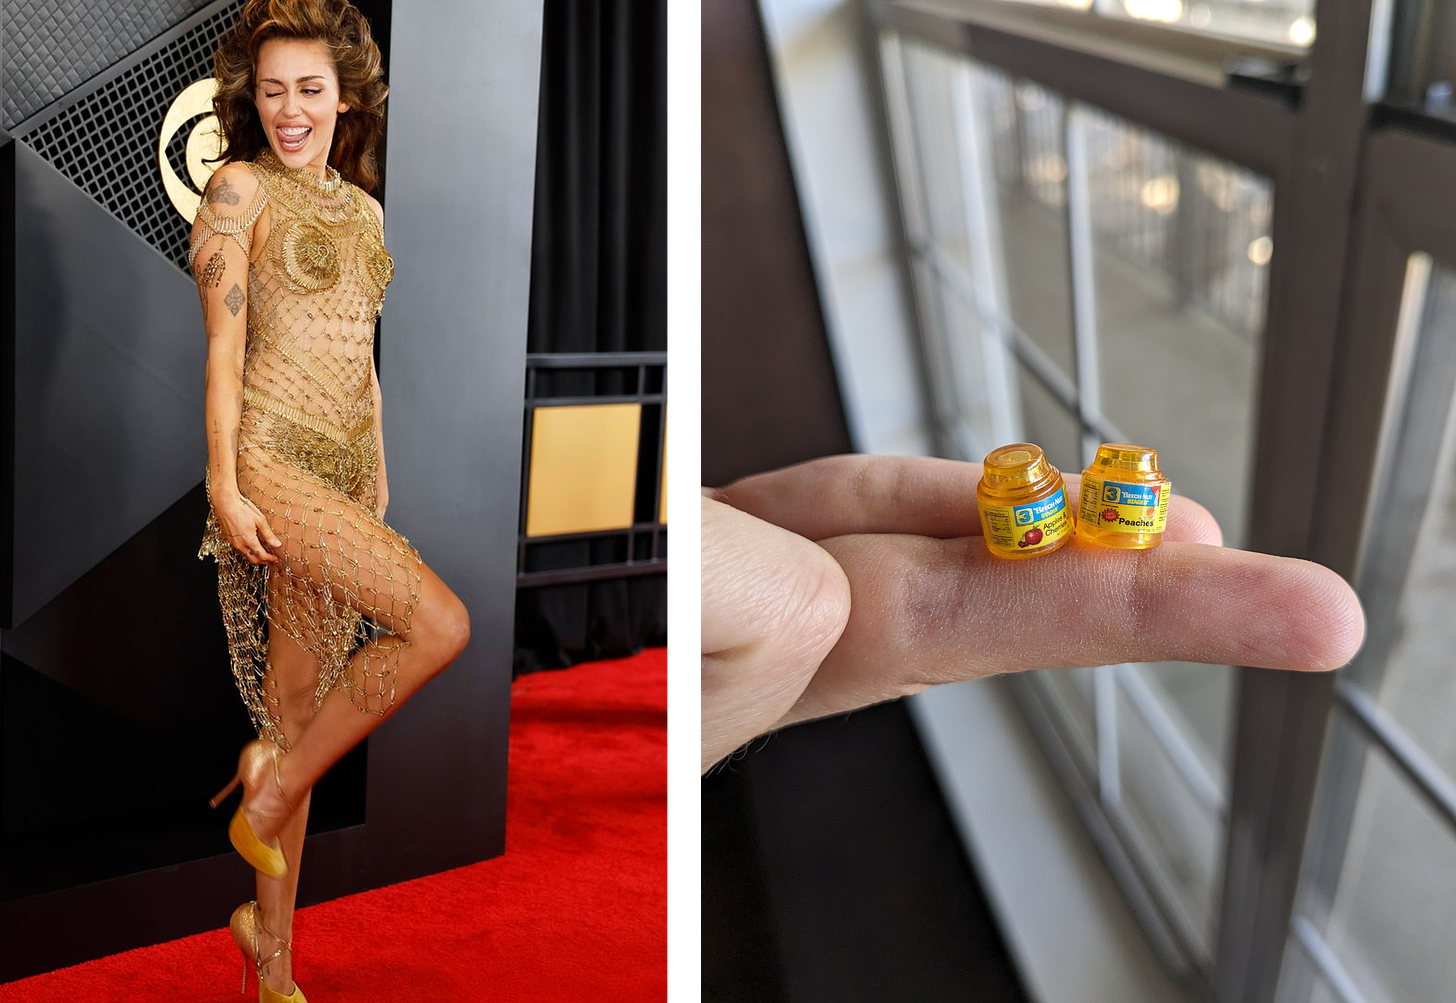 Left: Miley Cyrus in sheer gold chain mail. Right: 2 tiny plastic jars of baby food.